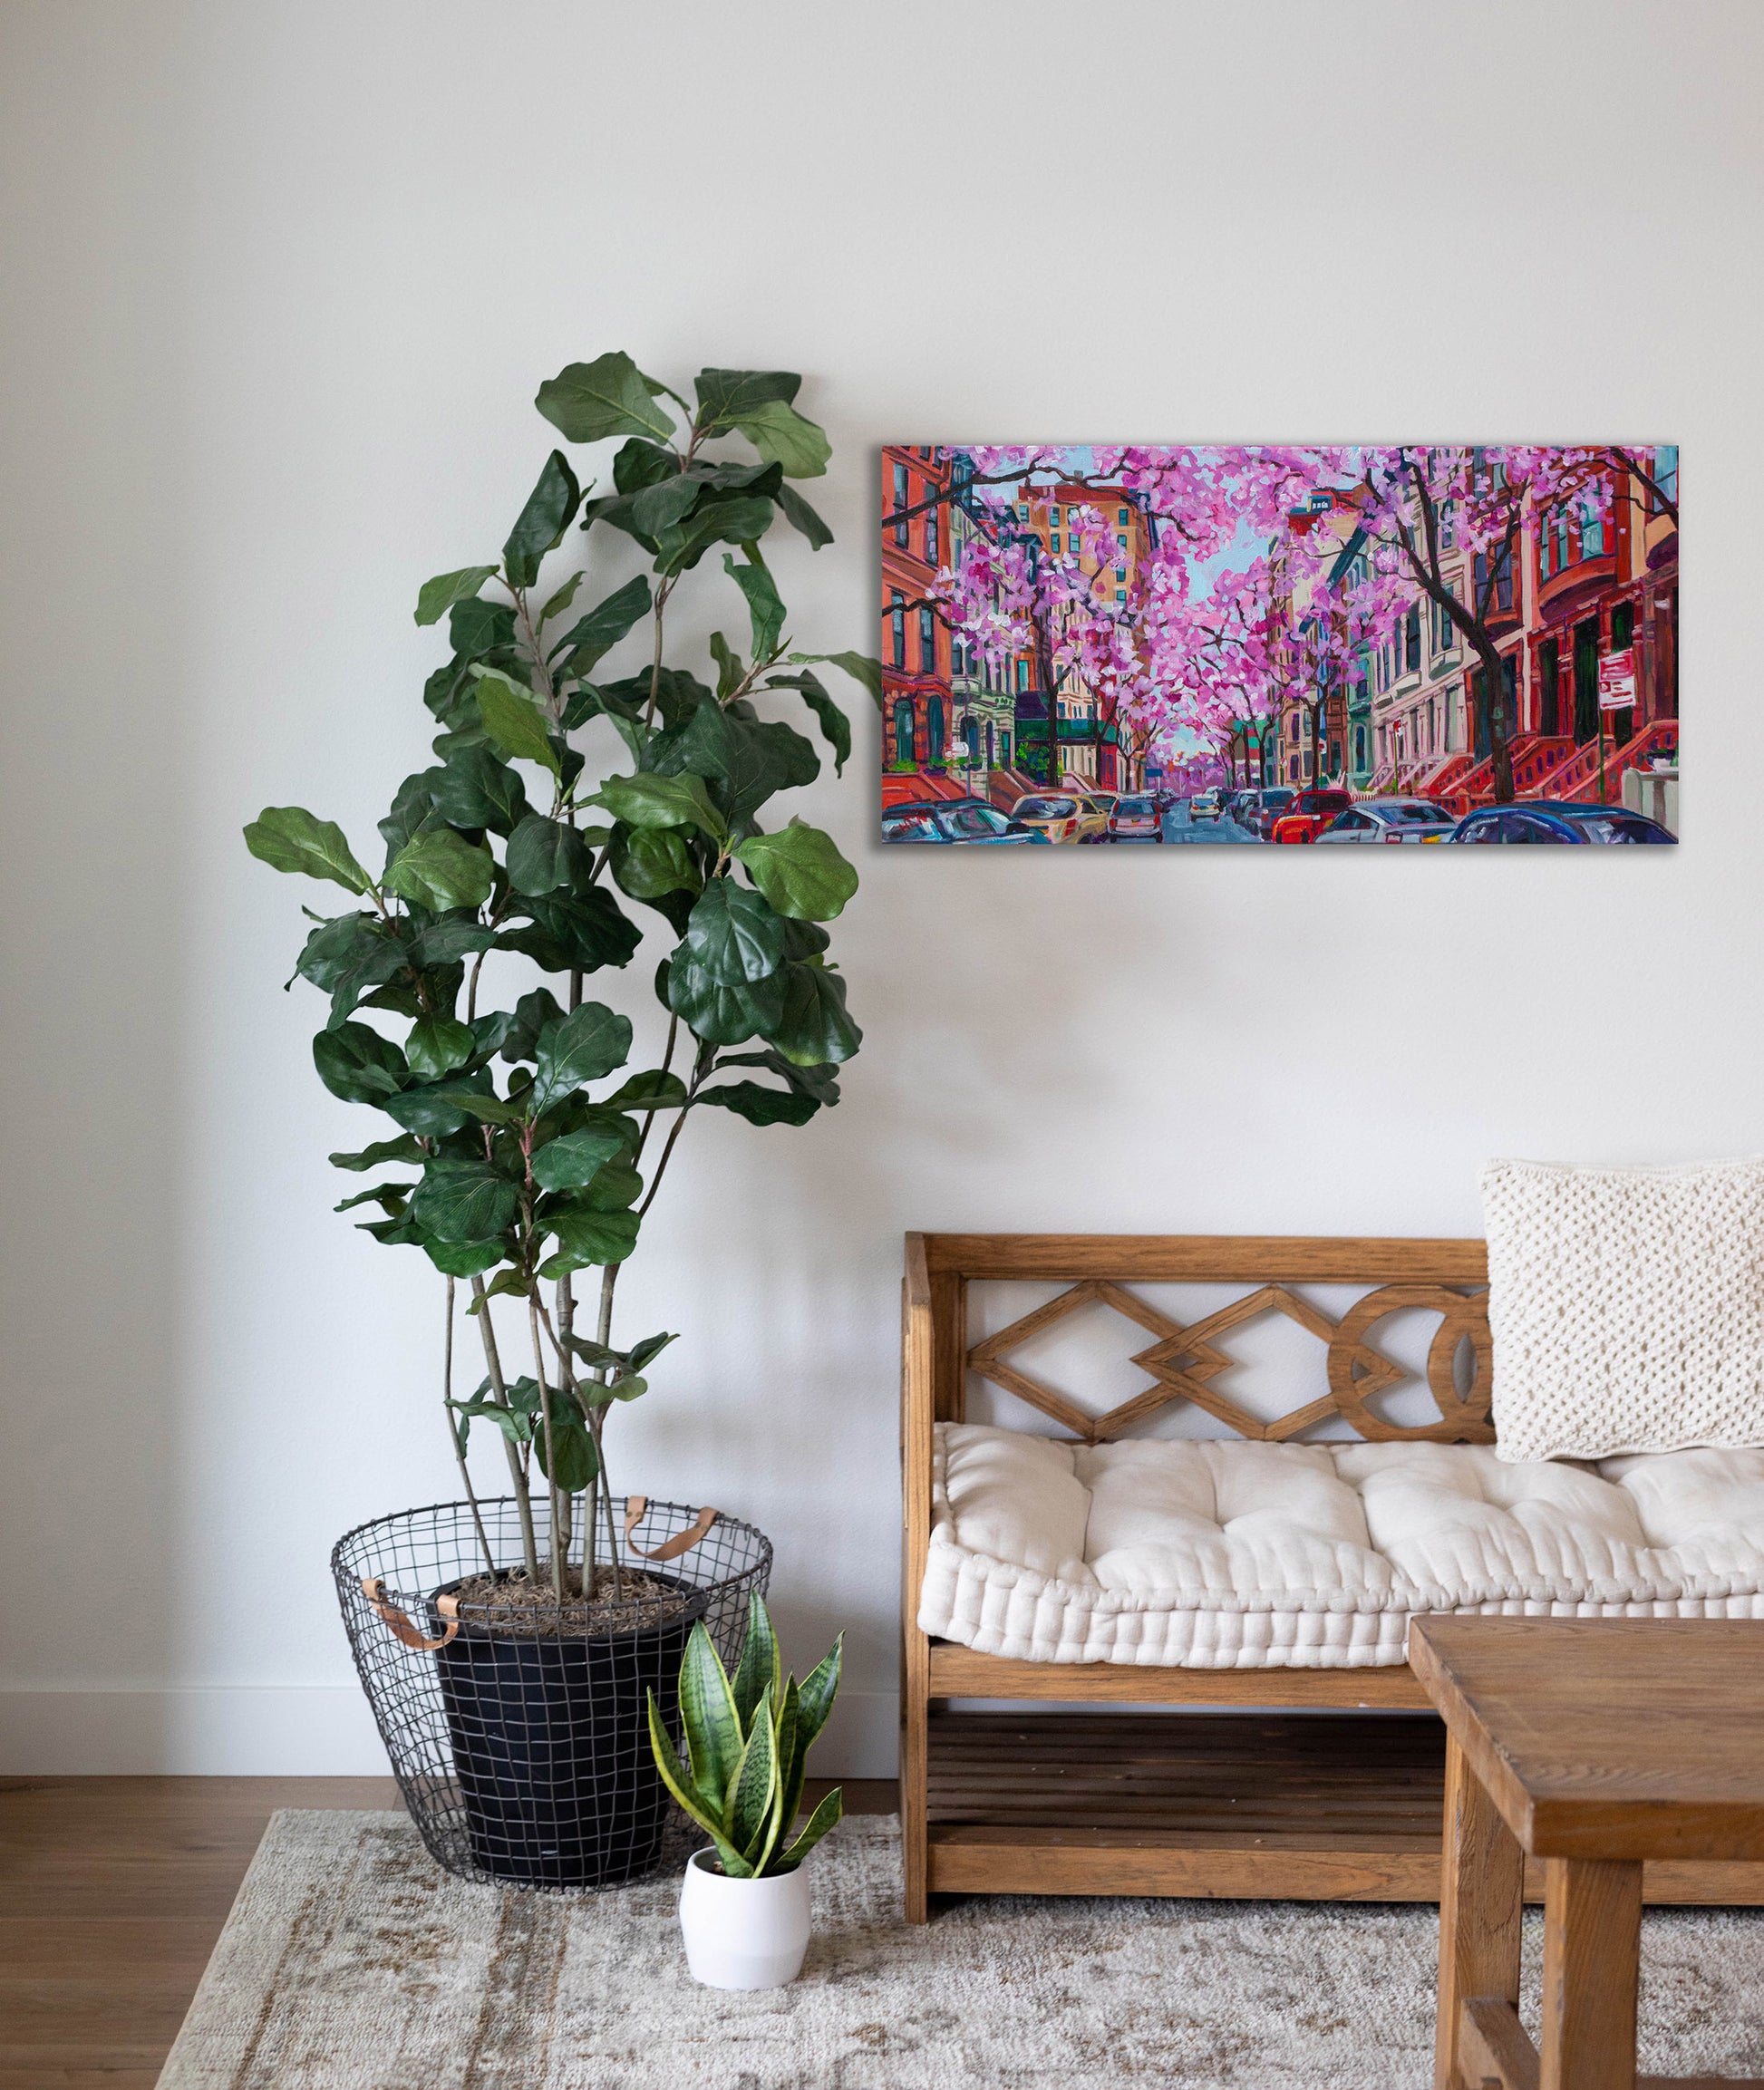 Painting hanging on wall with bench and tree: Vibrant street scene painting of NYC in spring with cherry blossoms in bloom and brownstone buildings.